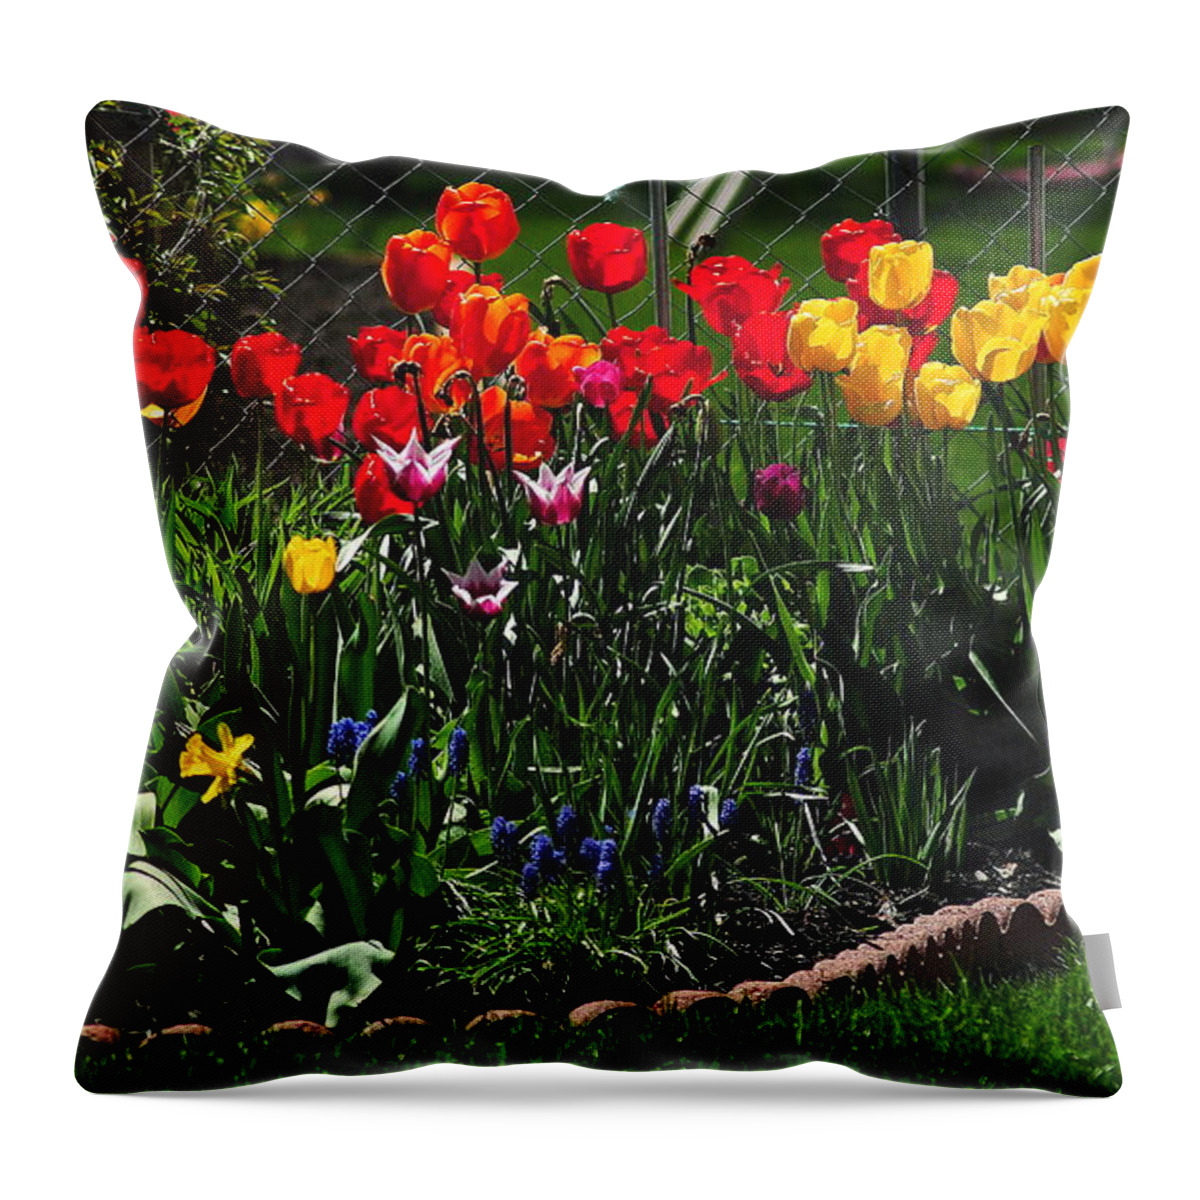 Flower Throw Pillow featuring the photograph Flower Garden #1 by Frozen in Time Fine Art Photography